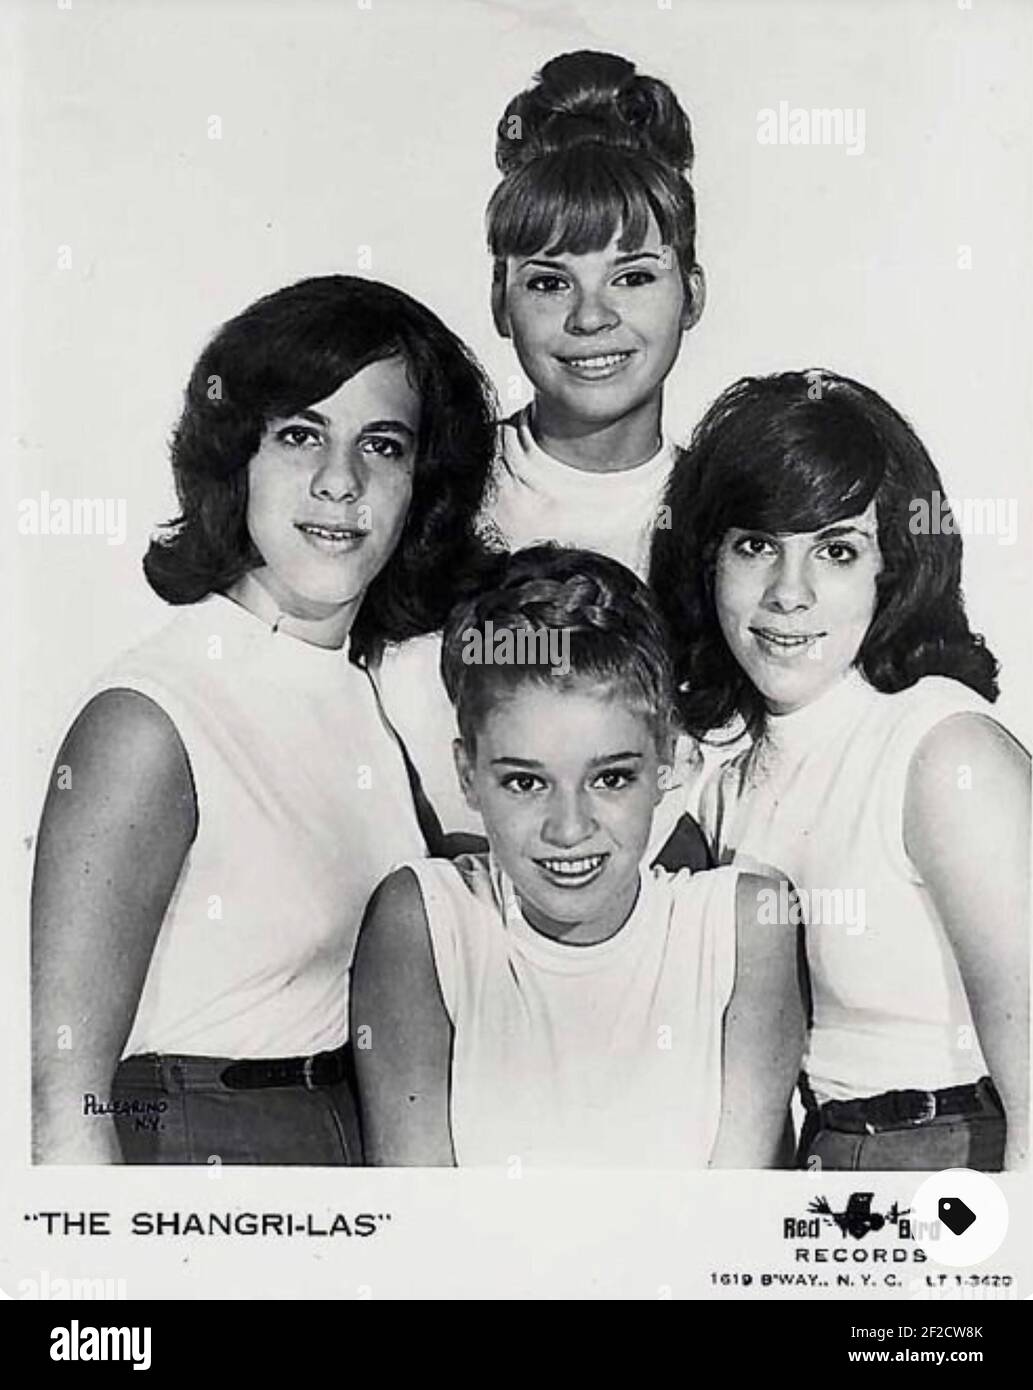 THE SHANGRI-LAS Promotional photo of American vocal group about 1964 Stock Photo